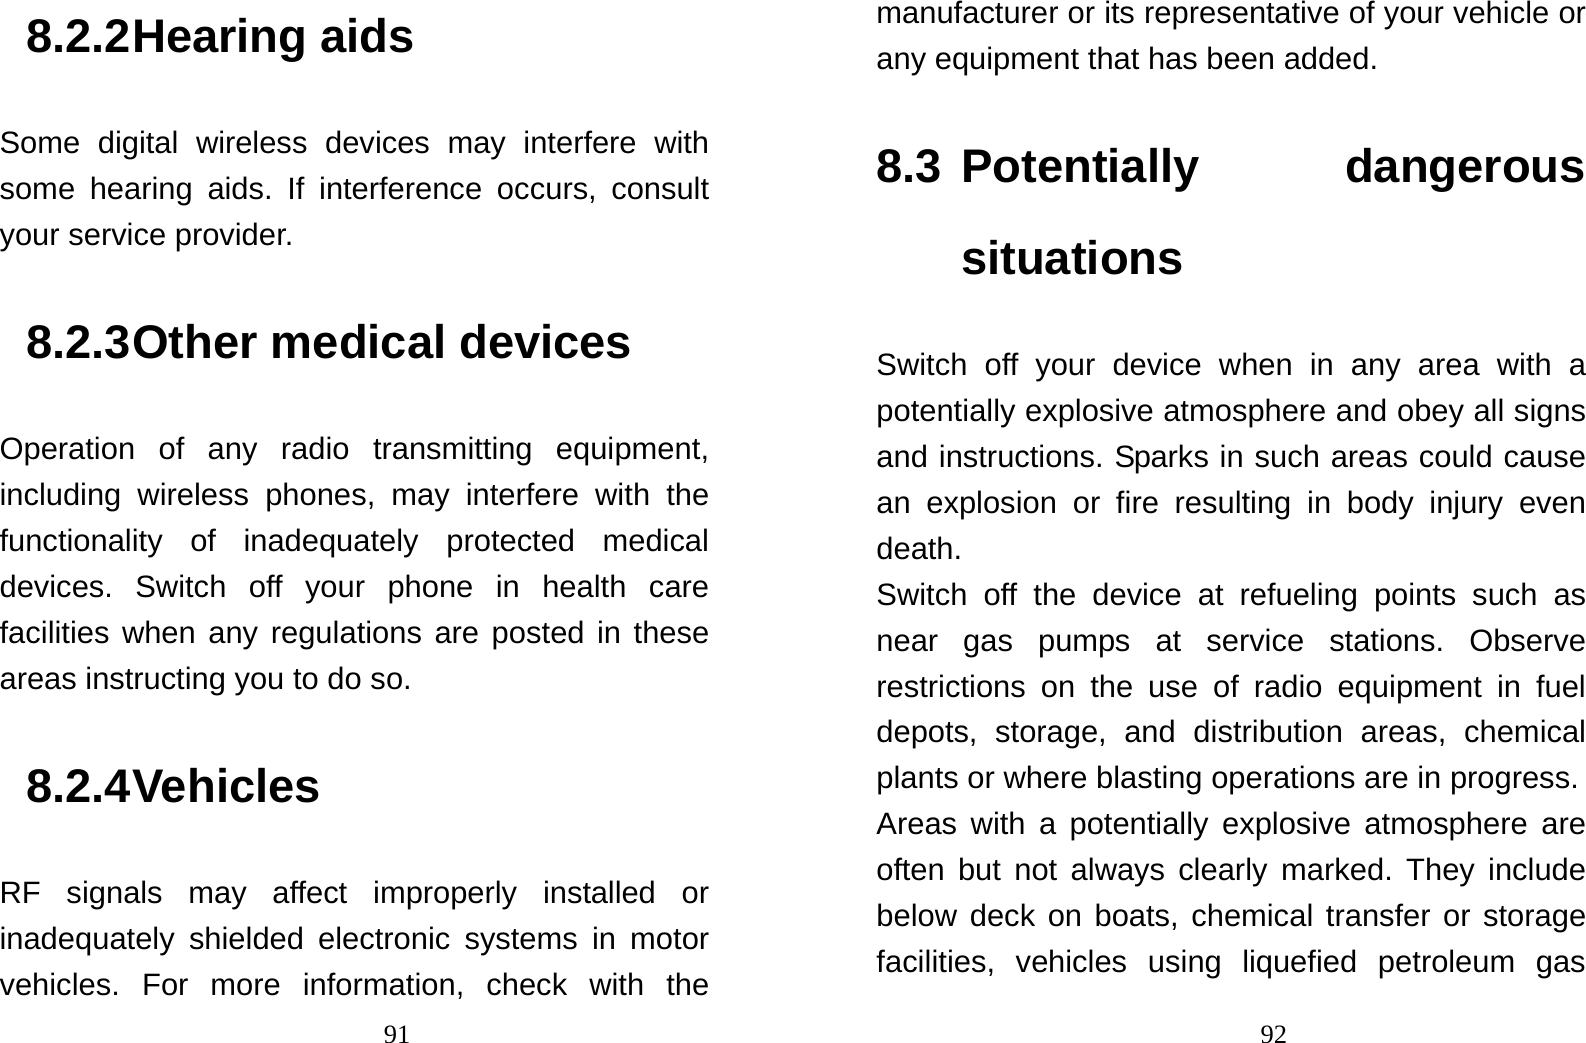                                918.2.2 Hearing aids Some digital wireless devices may interfere with some hearing aids. If interference occurs, consult your service provider. 8.2.3 Other medical devices Operation of any radio transmitting equipment, including wireless phones, may interfere with the functionality of inadequately protected medical devices. Switch off your phone in health care facilities when any regulations are posted in these areas instructing you to do so. 8.2.4 Vehicles RF signals may affect improperly installed or inadequately shielded electronic systems in motor vehicles. For more information, check with the                                92manufacturer or its representative of your vehicle or any equipment that has been added. 8.3 Potentially  dangerous situations Switch off your device when in any area with a potentially explosive atmosphere and obey all signs and instructions. Sparks in such areas could cause an explosion or fire resulting in body injury even death. Switch off the device at refueling points such as near gas pumps at service stations. Observe restrictions on the use of radio equipment in fuel depots, storage, and distribution areas, chemical plants or where blasting operations are in progress. Areas with a potentially explosive atmosphere are often but not always clearly marked. They include below deck on boats, chemical transfer or storage facilities, vehicles using liquefied petroleum gas 